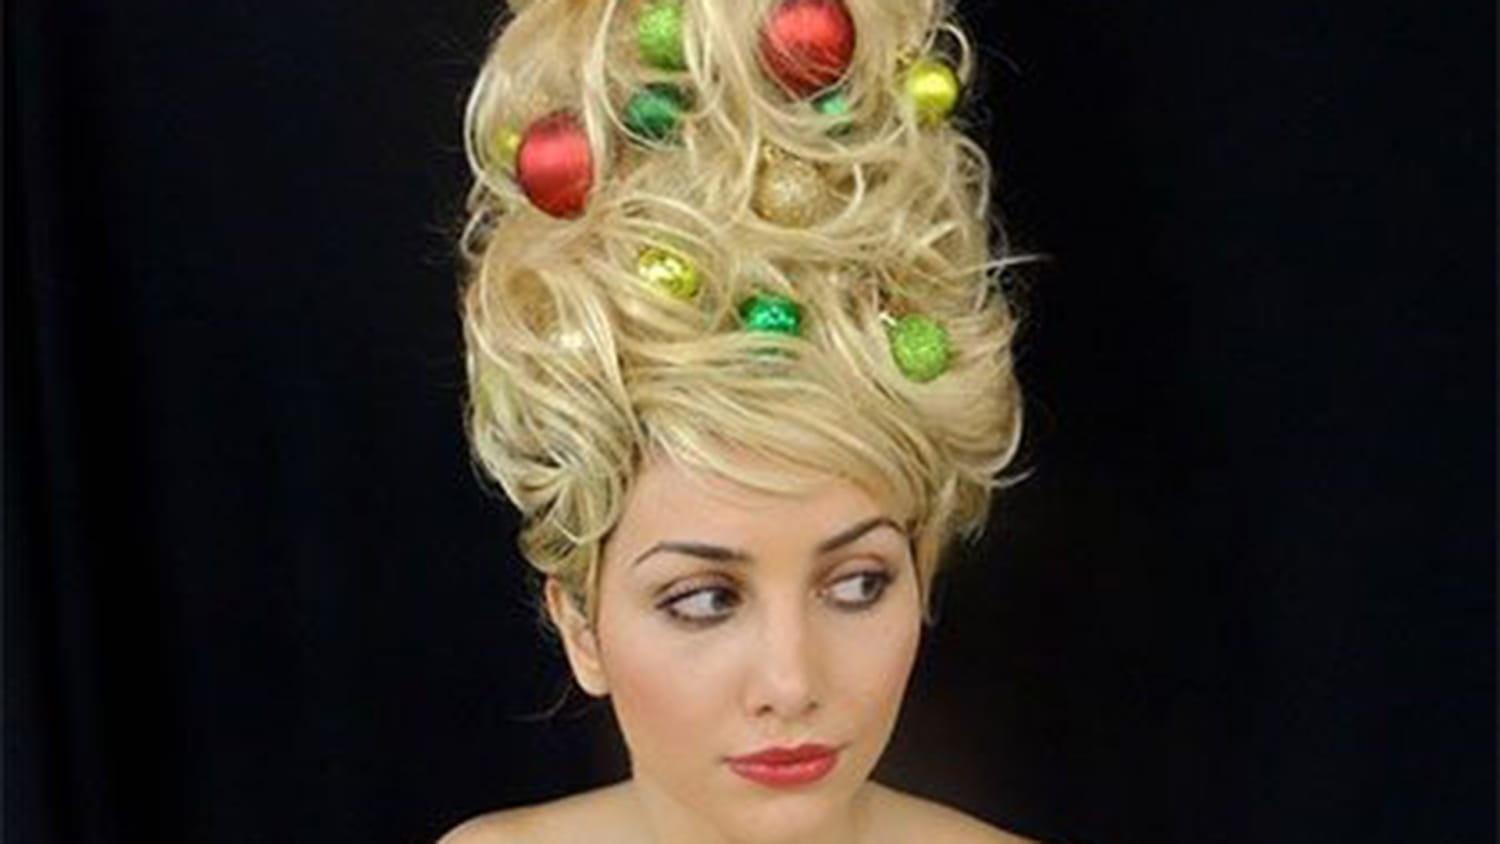 Christmas tree hair is the new holiday trend